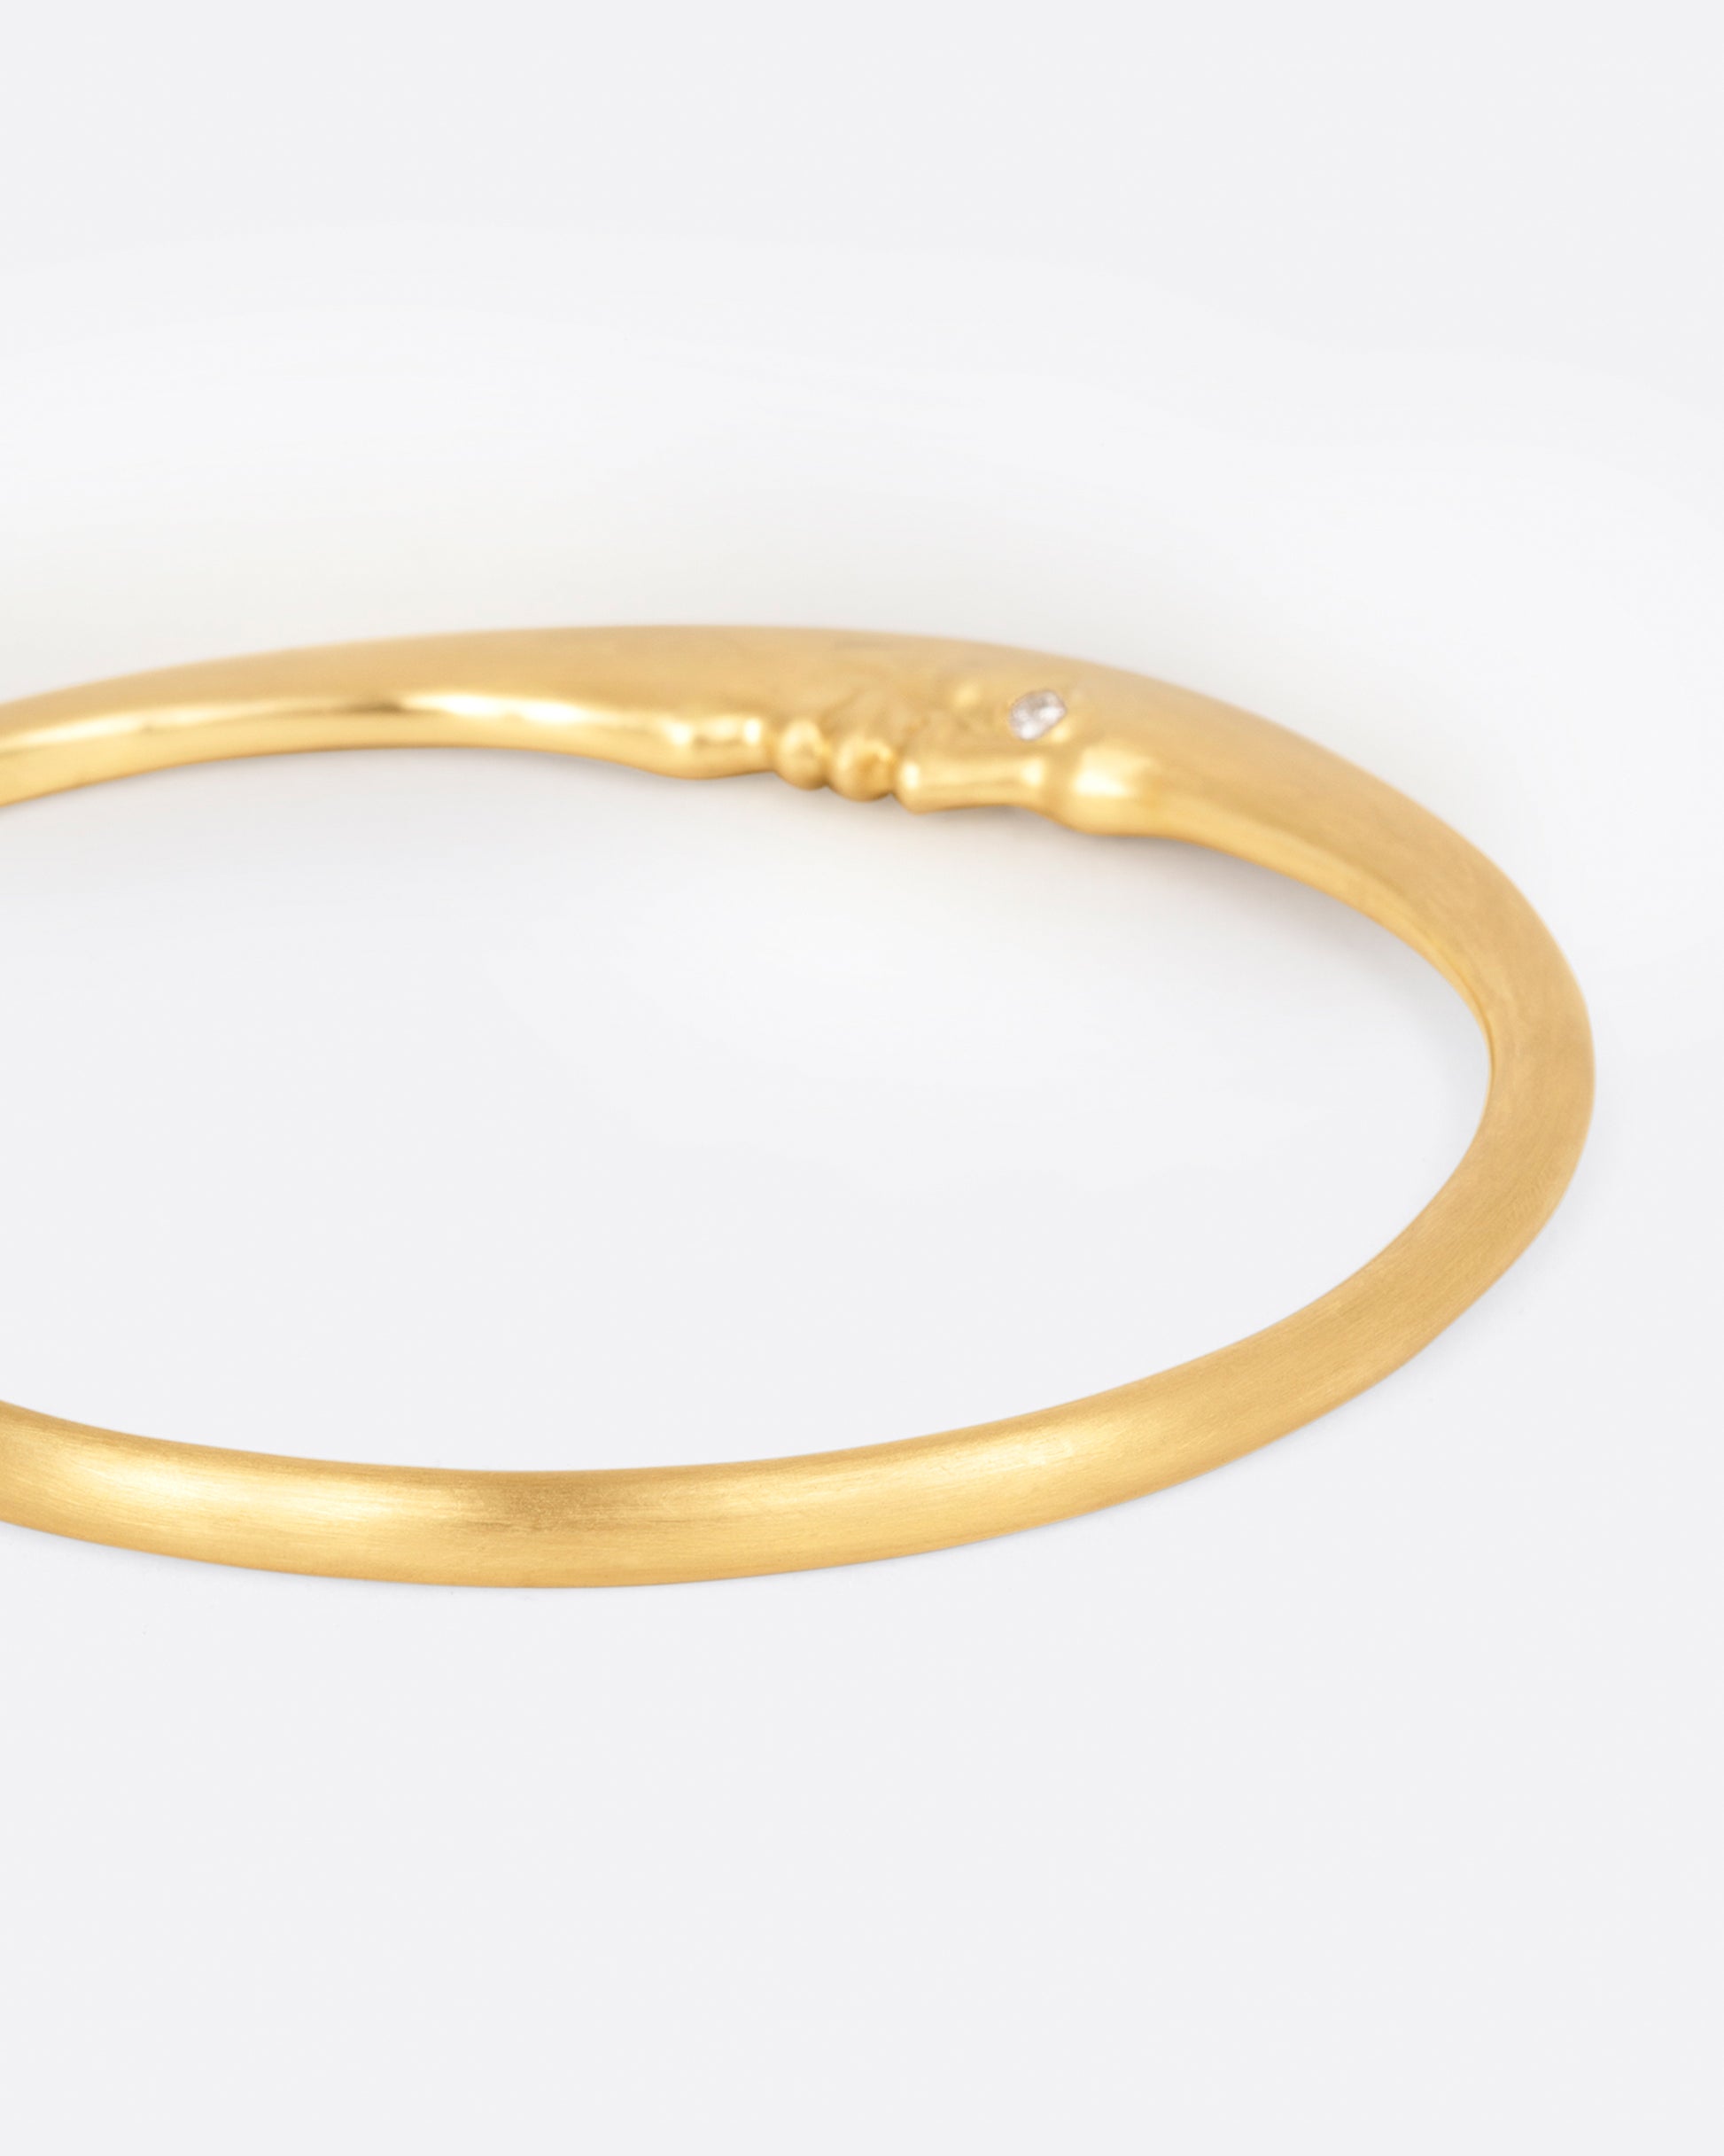 A yellow gold bangle bracelet with a moonface and diamond eyes, shown from the side.